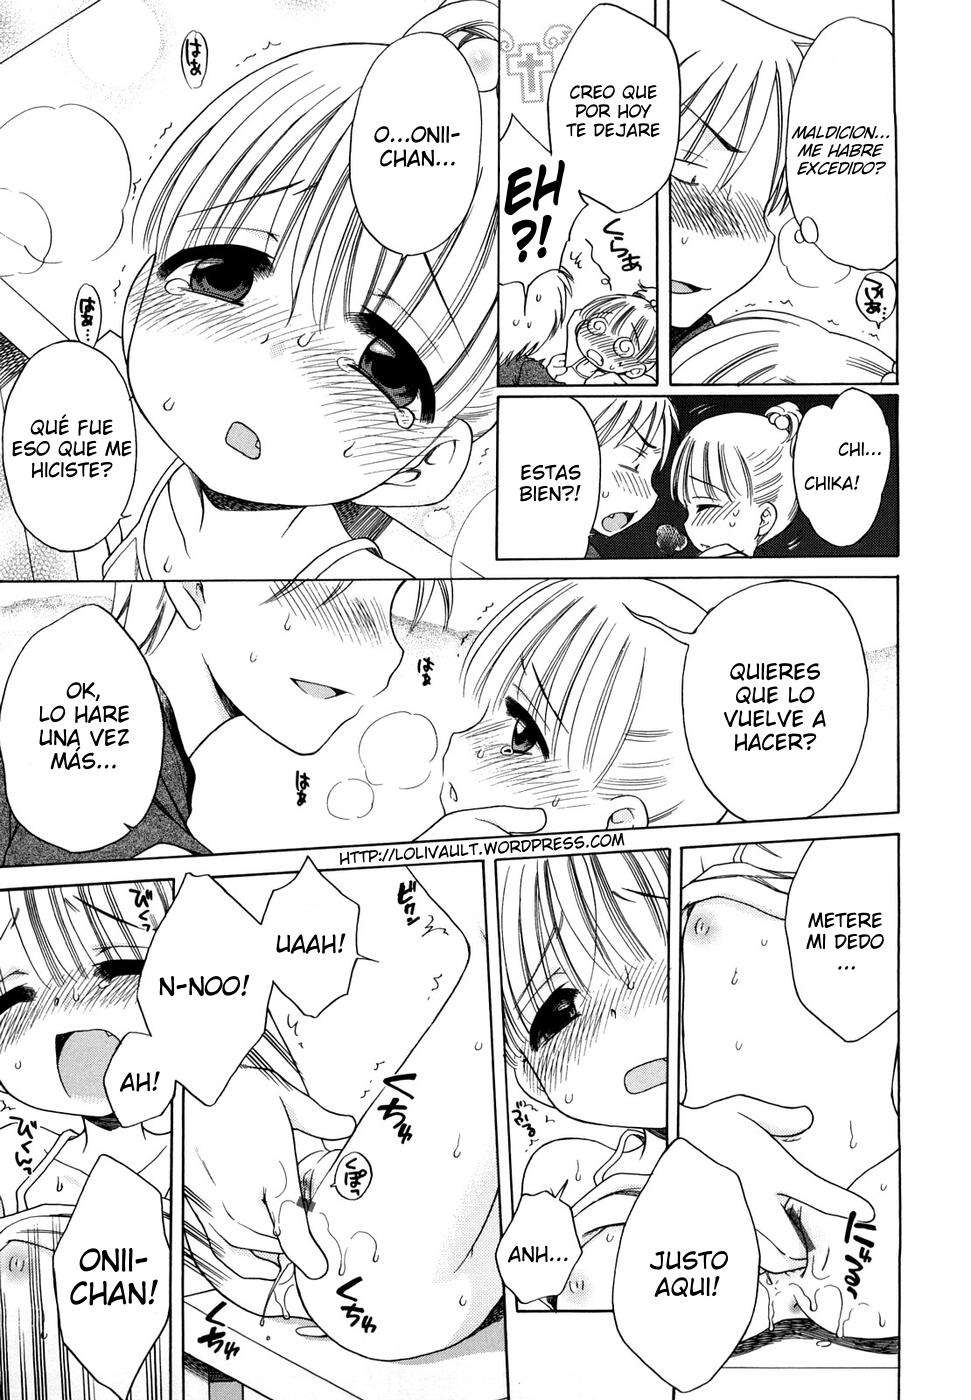 Onii-chan!! Me gustas.. Chapter-3 - 10